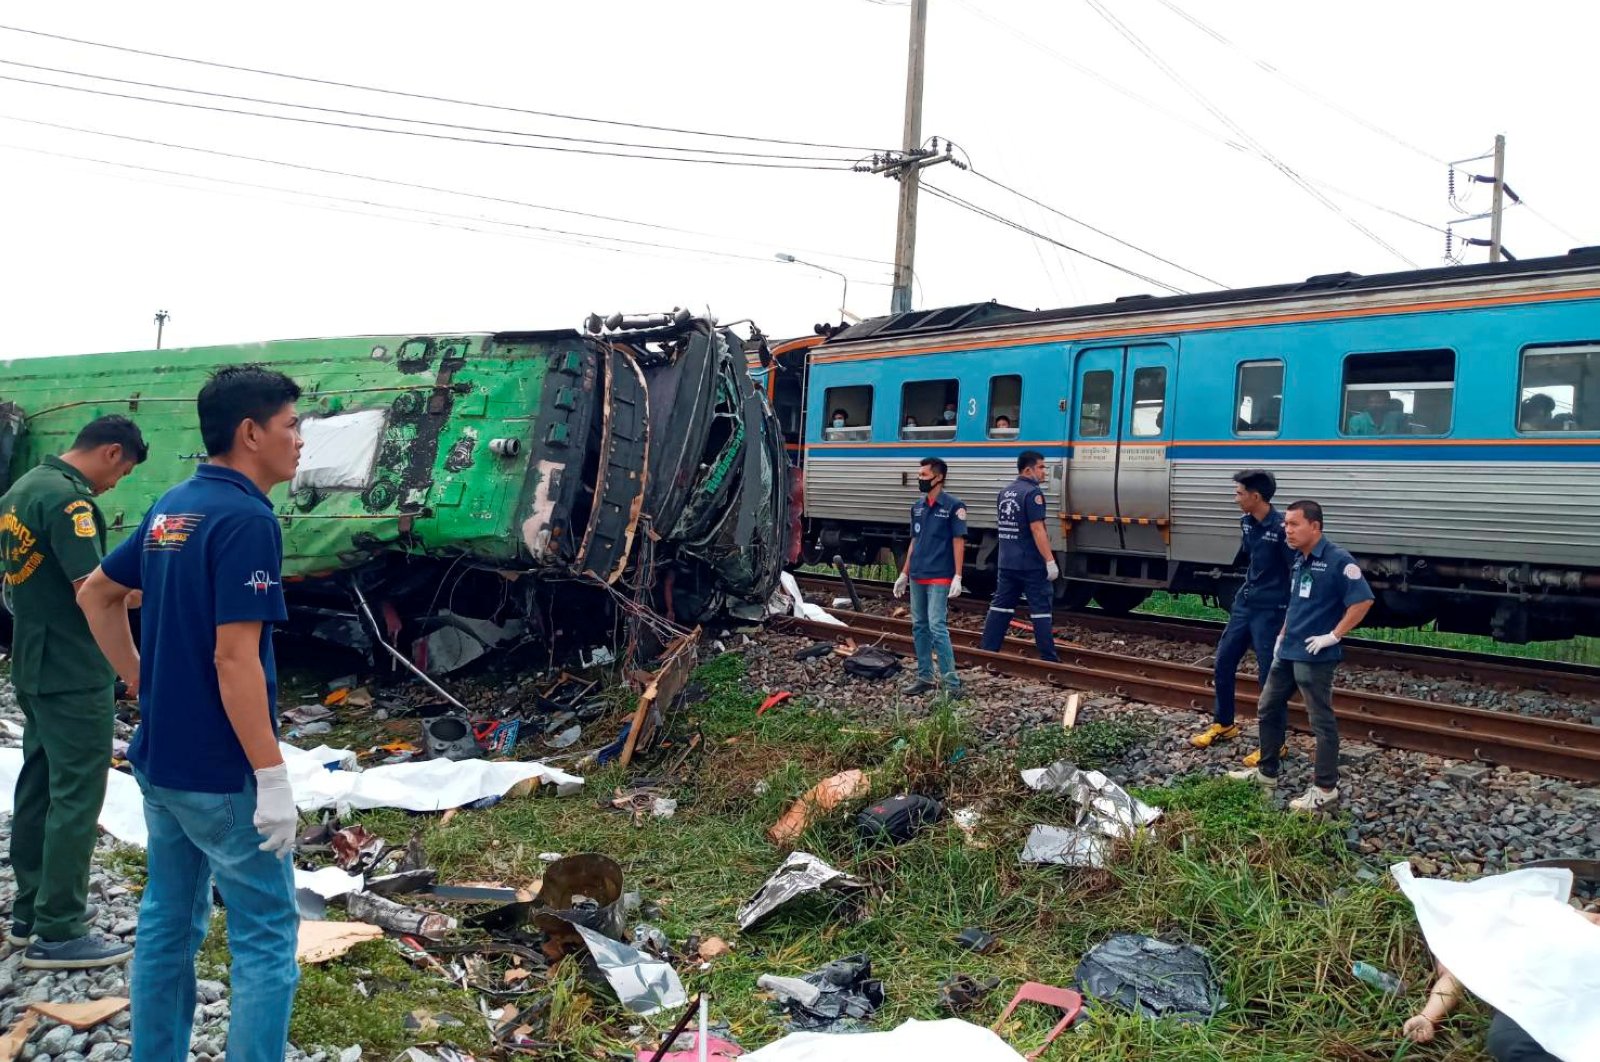 Rescue workers stand at the crash site where a train collided with a passenger bus in Chachoengsao province in central Thailand, Oct. 11, 2020. (Reuters Photo)